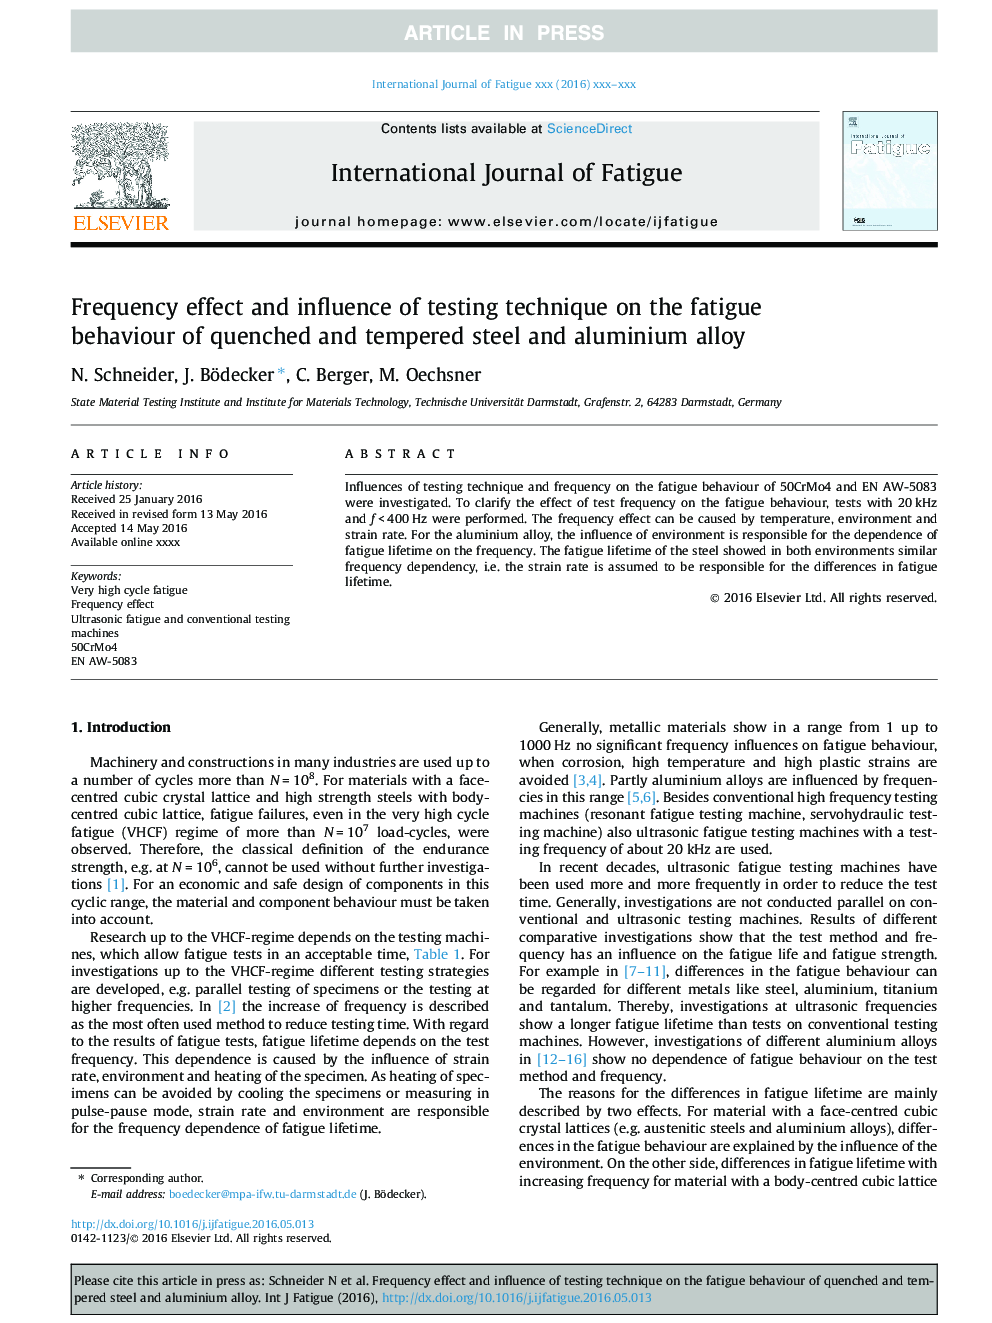 Frequency effect and influence of testing technique on the fatigue behaviour of quenched and tempered steel and aluminium alloy